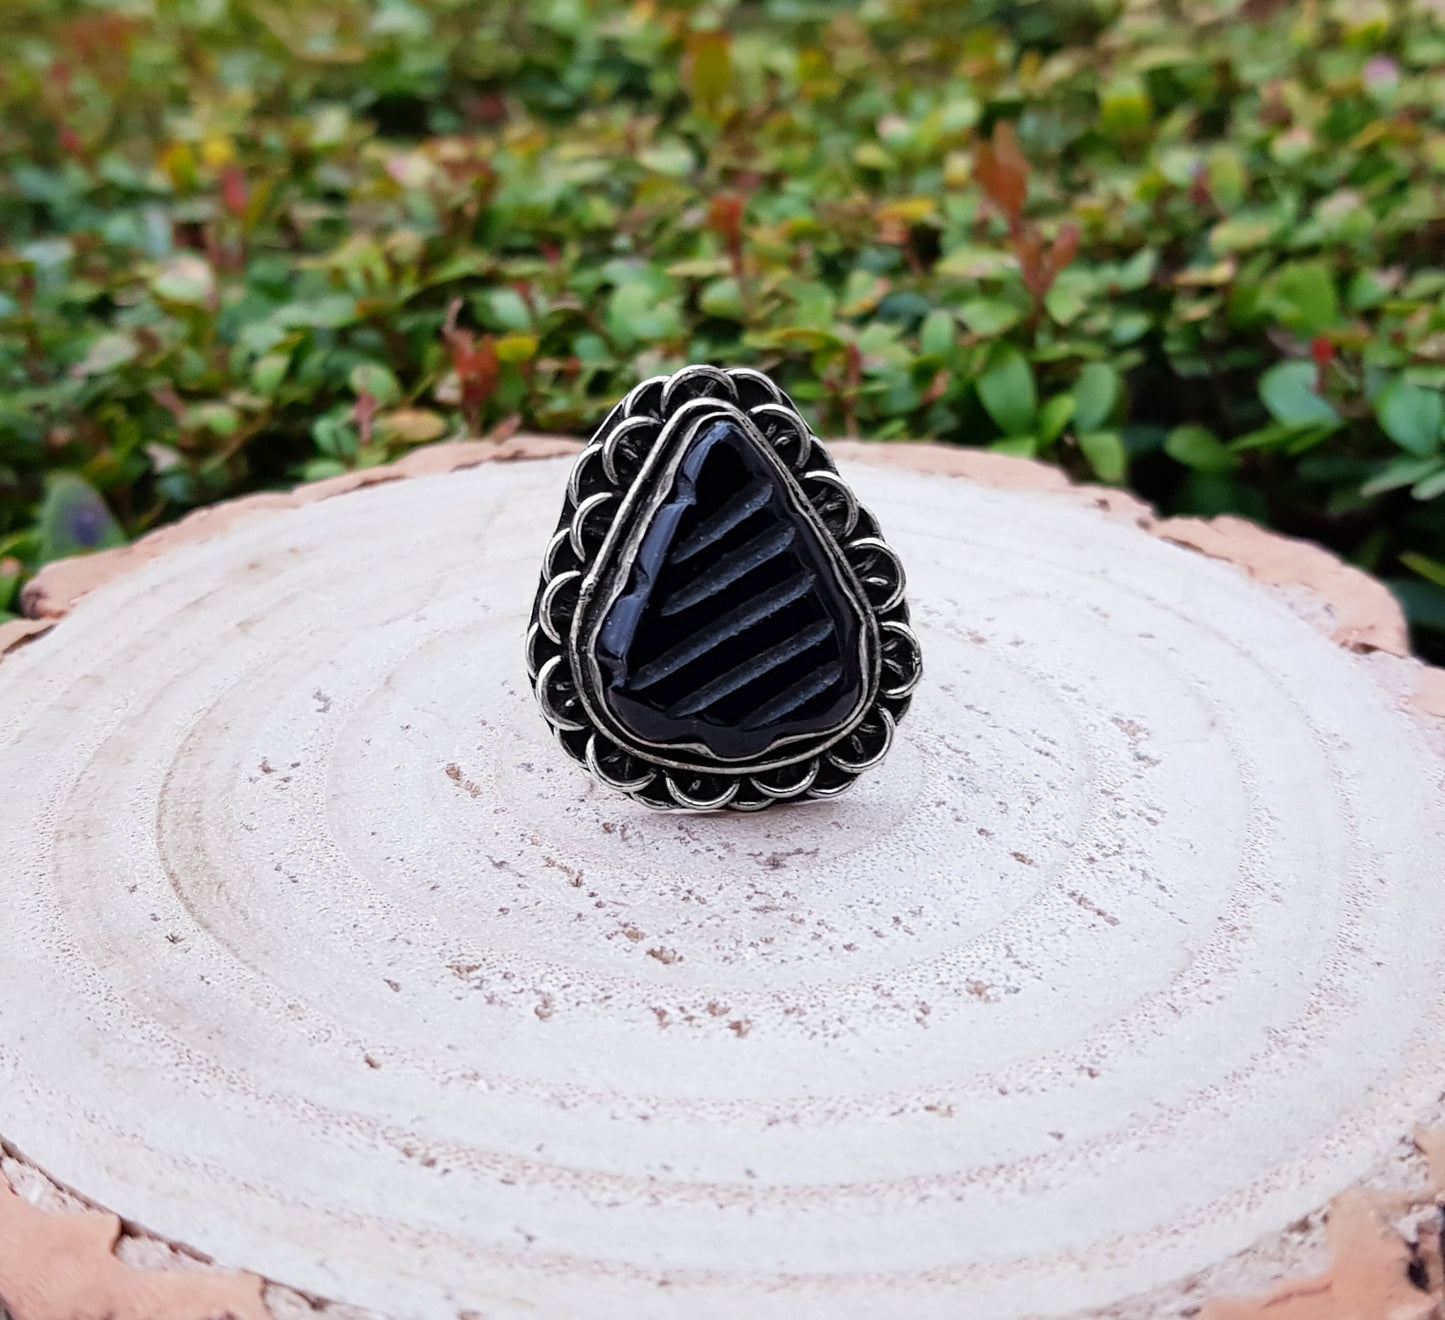 Carved Black Onyx Sterling Silver Ring Size US 7 1/2 Mens Ring Unisex Ring Boho Ring Gypsy Jewellery Statement Ring Unique Gift